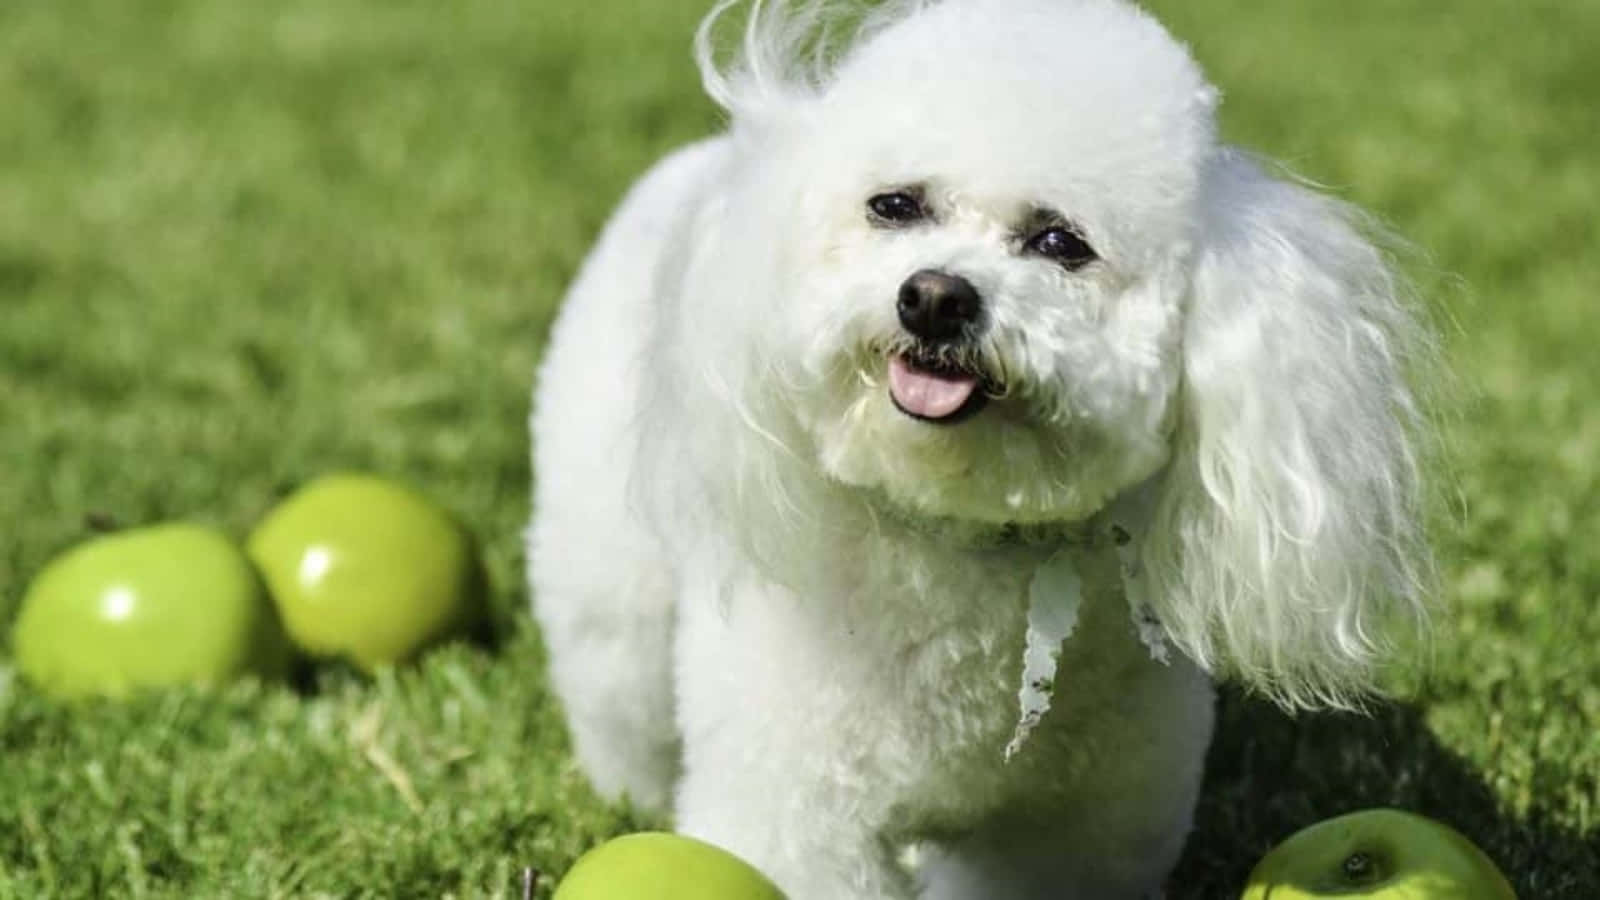 A fluffy white Bichon Frise smiles excitedly